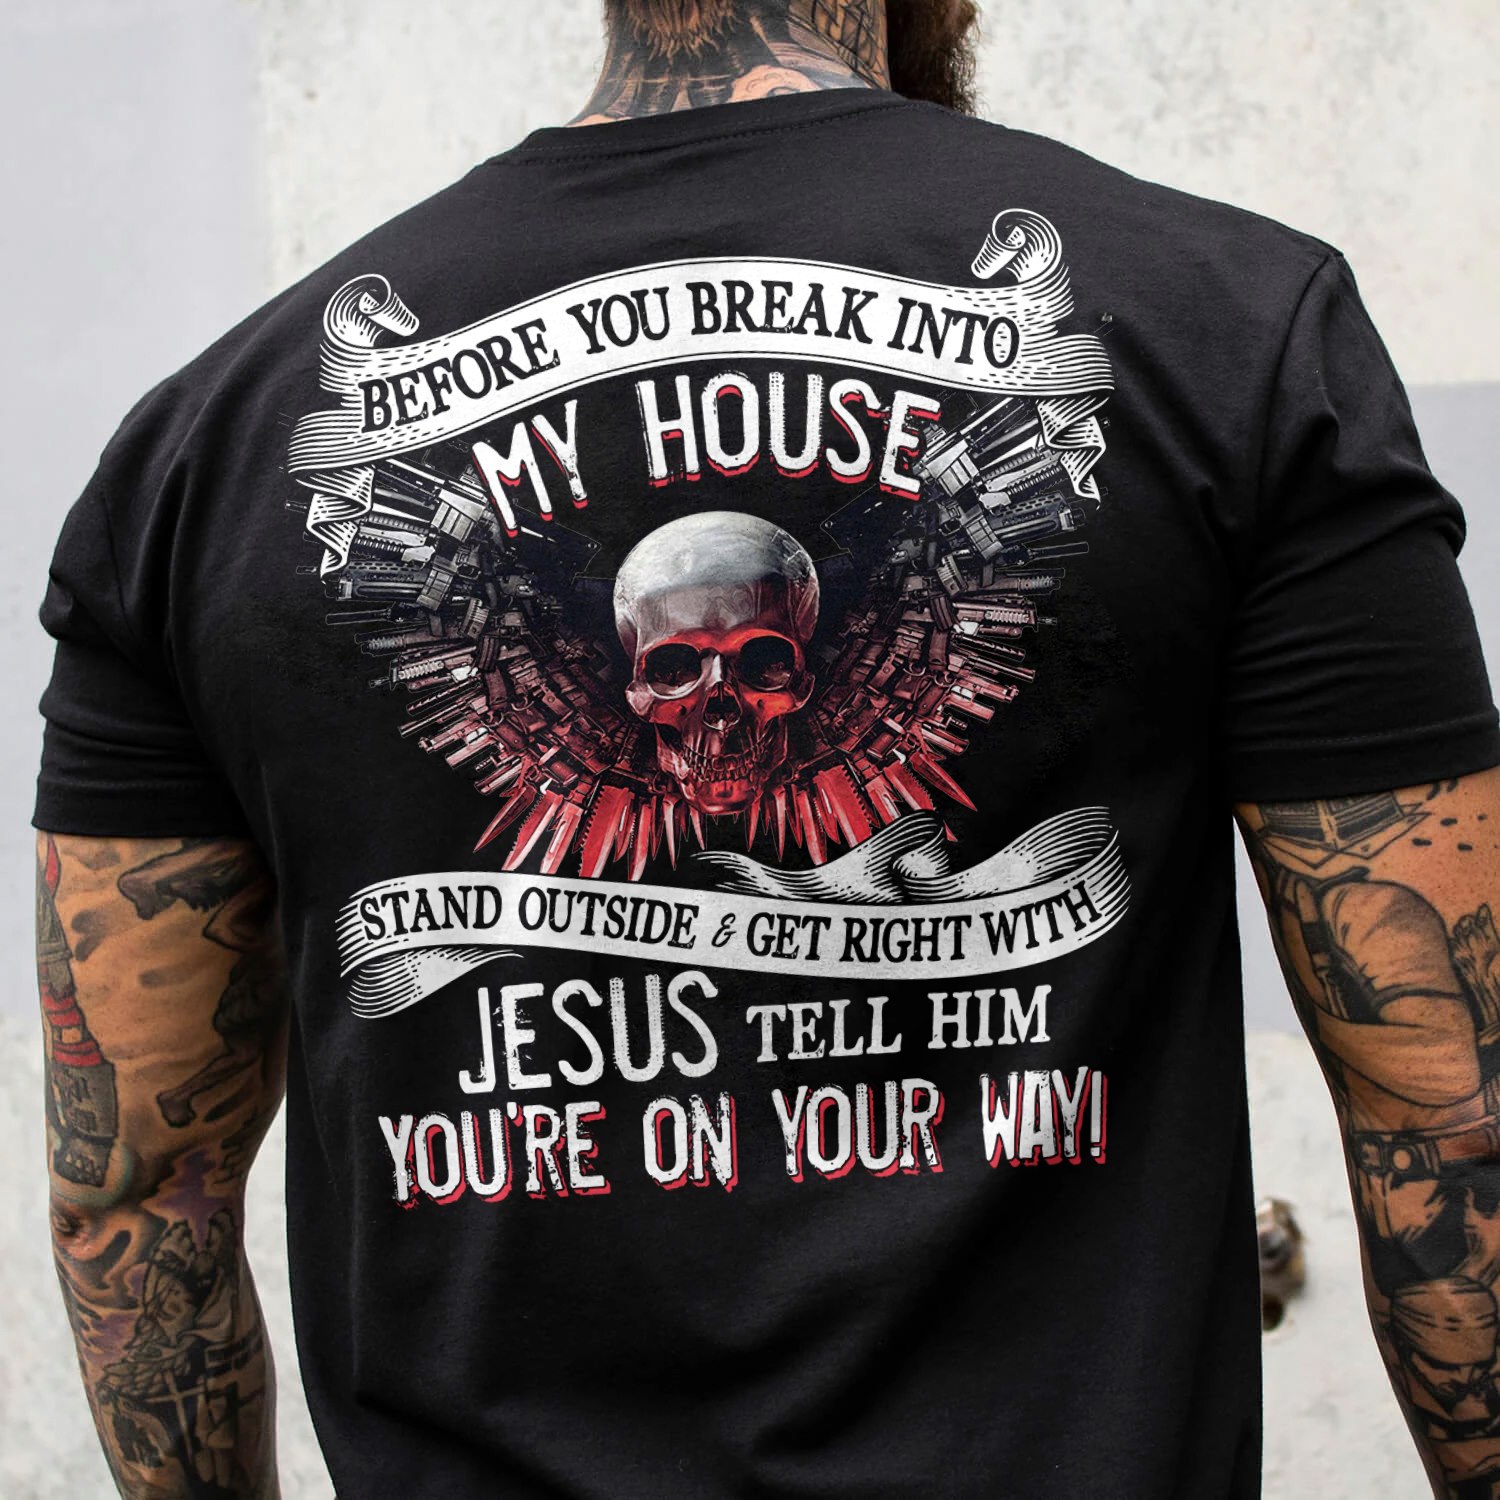 Before you break into my house stand outside and get right with Jesus - Evil skullcap